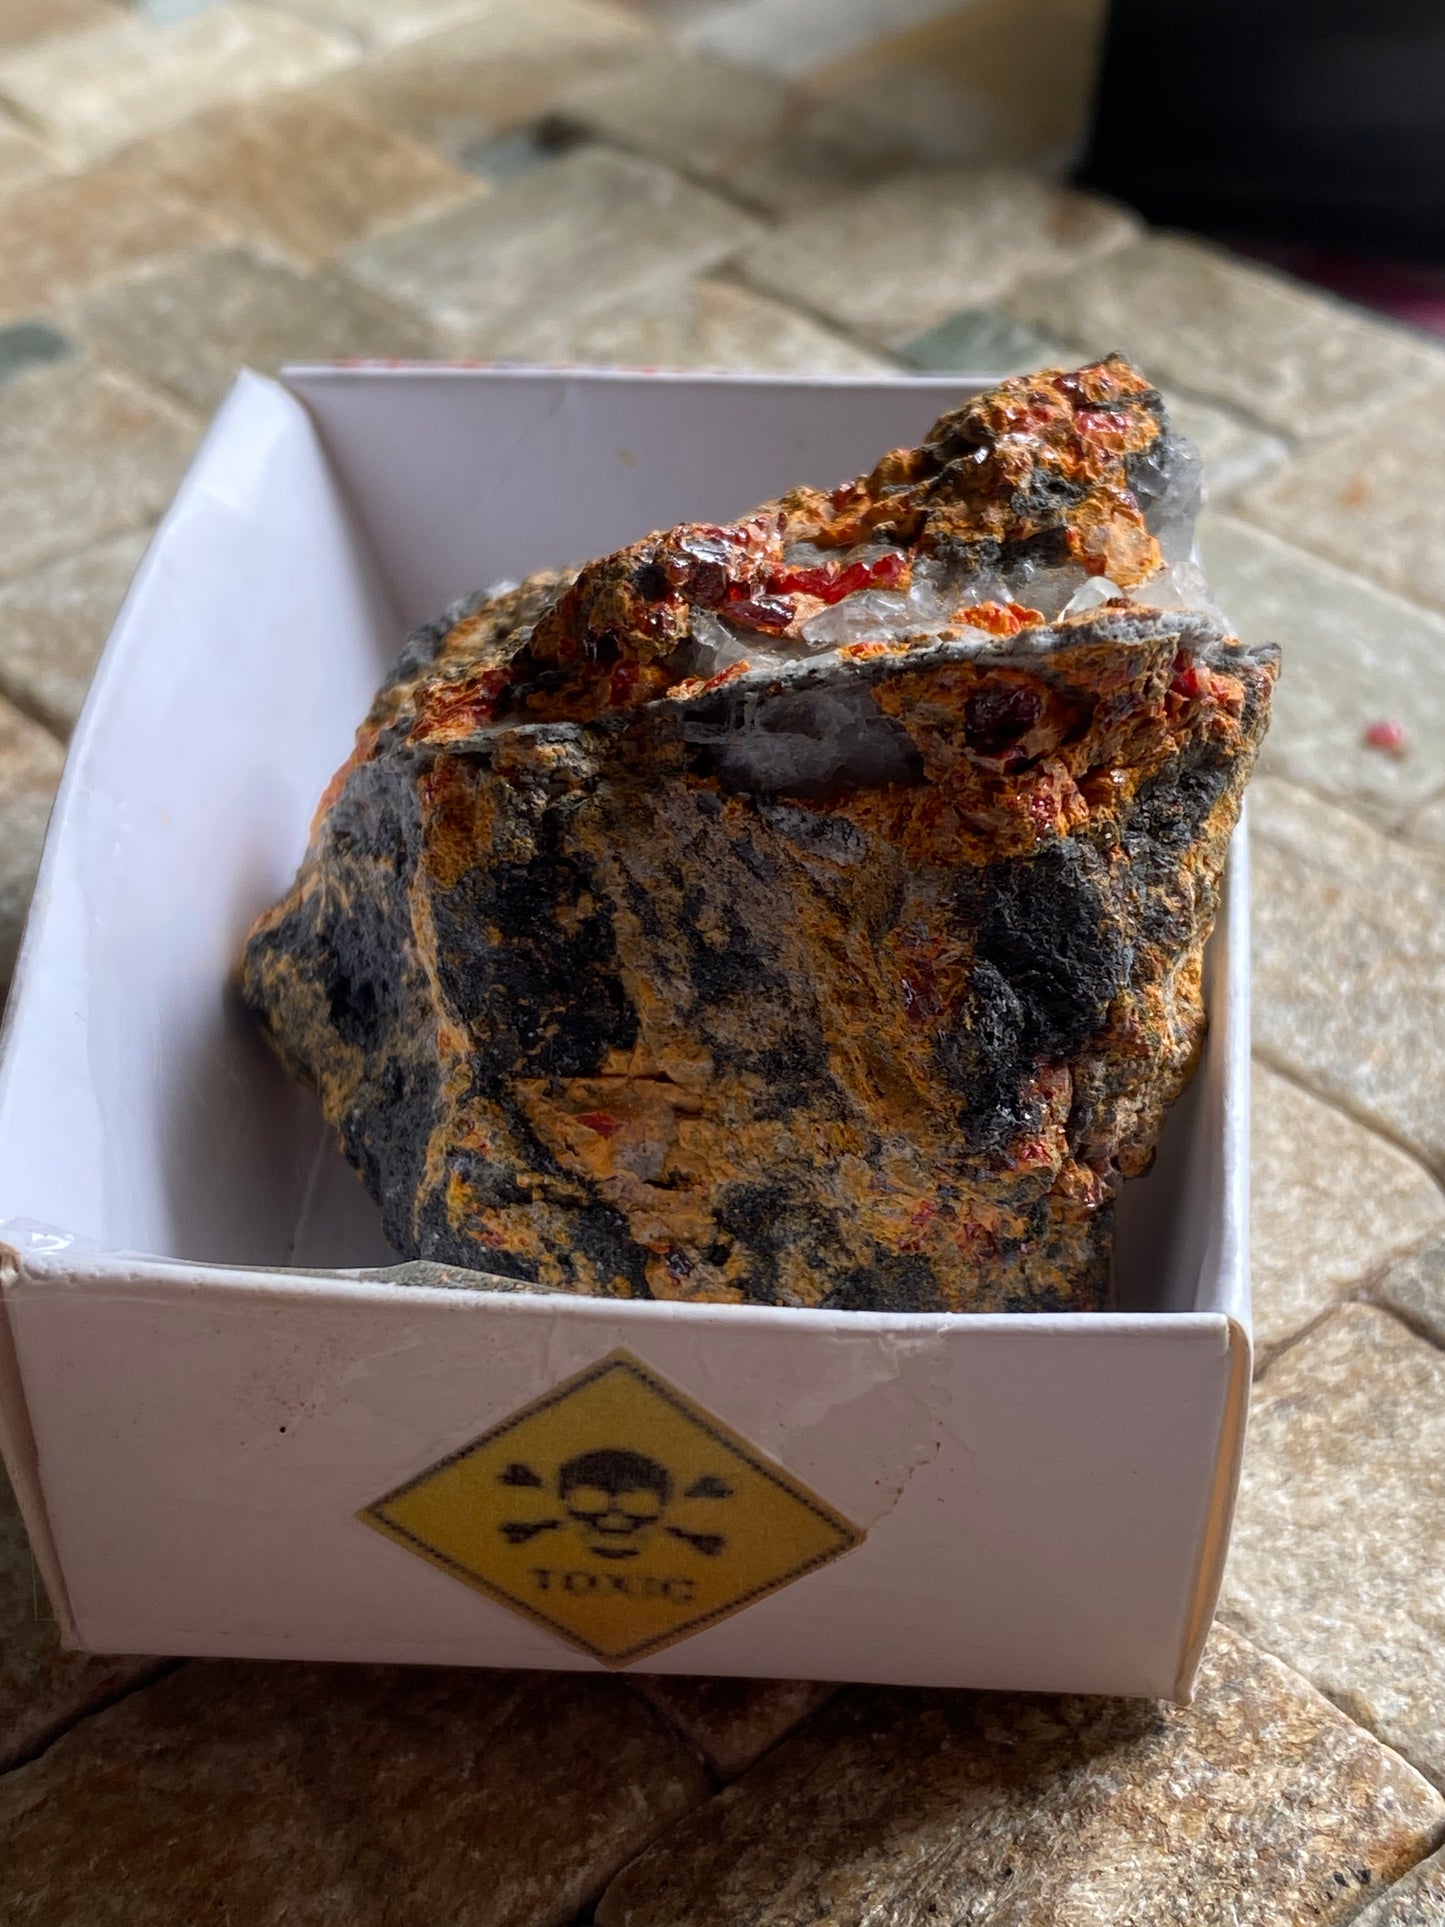 REALGAR/ORPIMENT ETC FROM YELLOWSTONE, WYOMING, U.S.A. 110g MF843